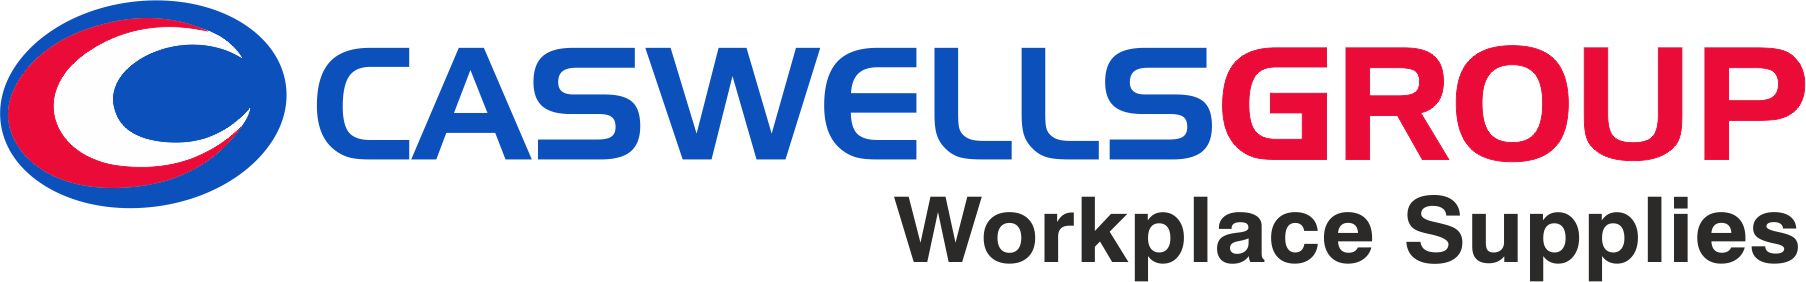 logo for CaswellsGroup